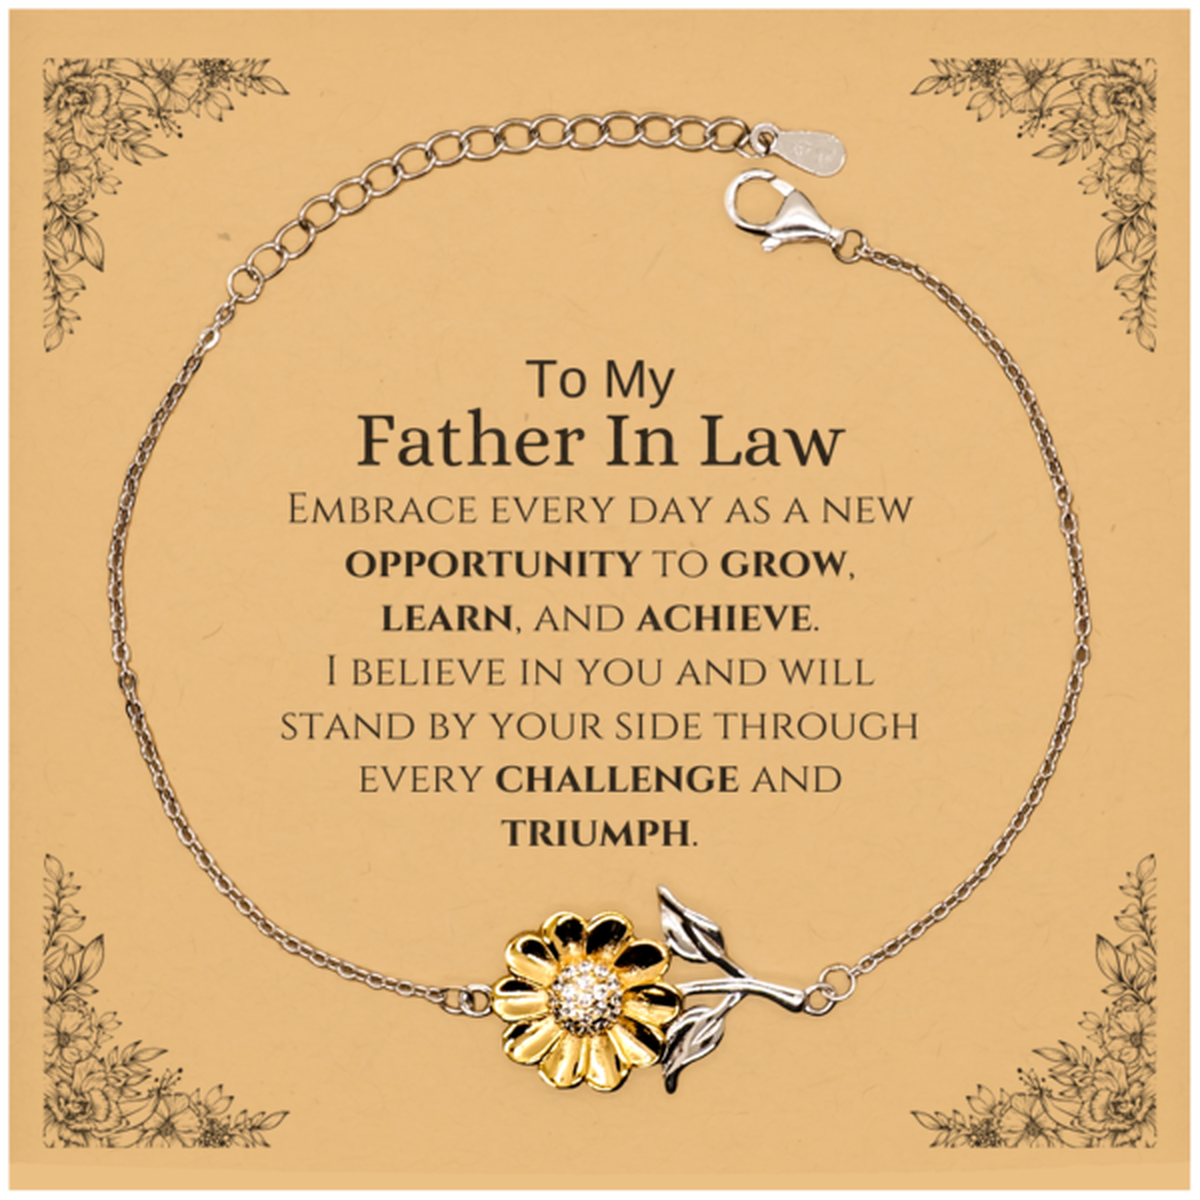 To My Father In Law Gifts, I believe in you and will stand by your side, Inspirational Sunflower Bracelet For Father In Law, Birthday Christmas Motivational Father In Law Gifts